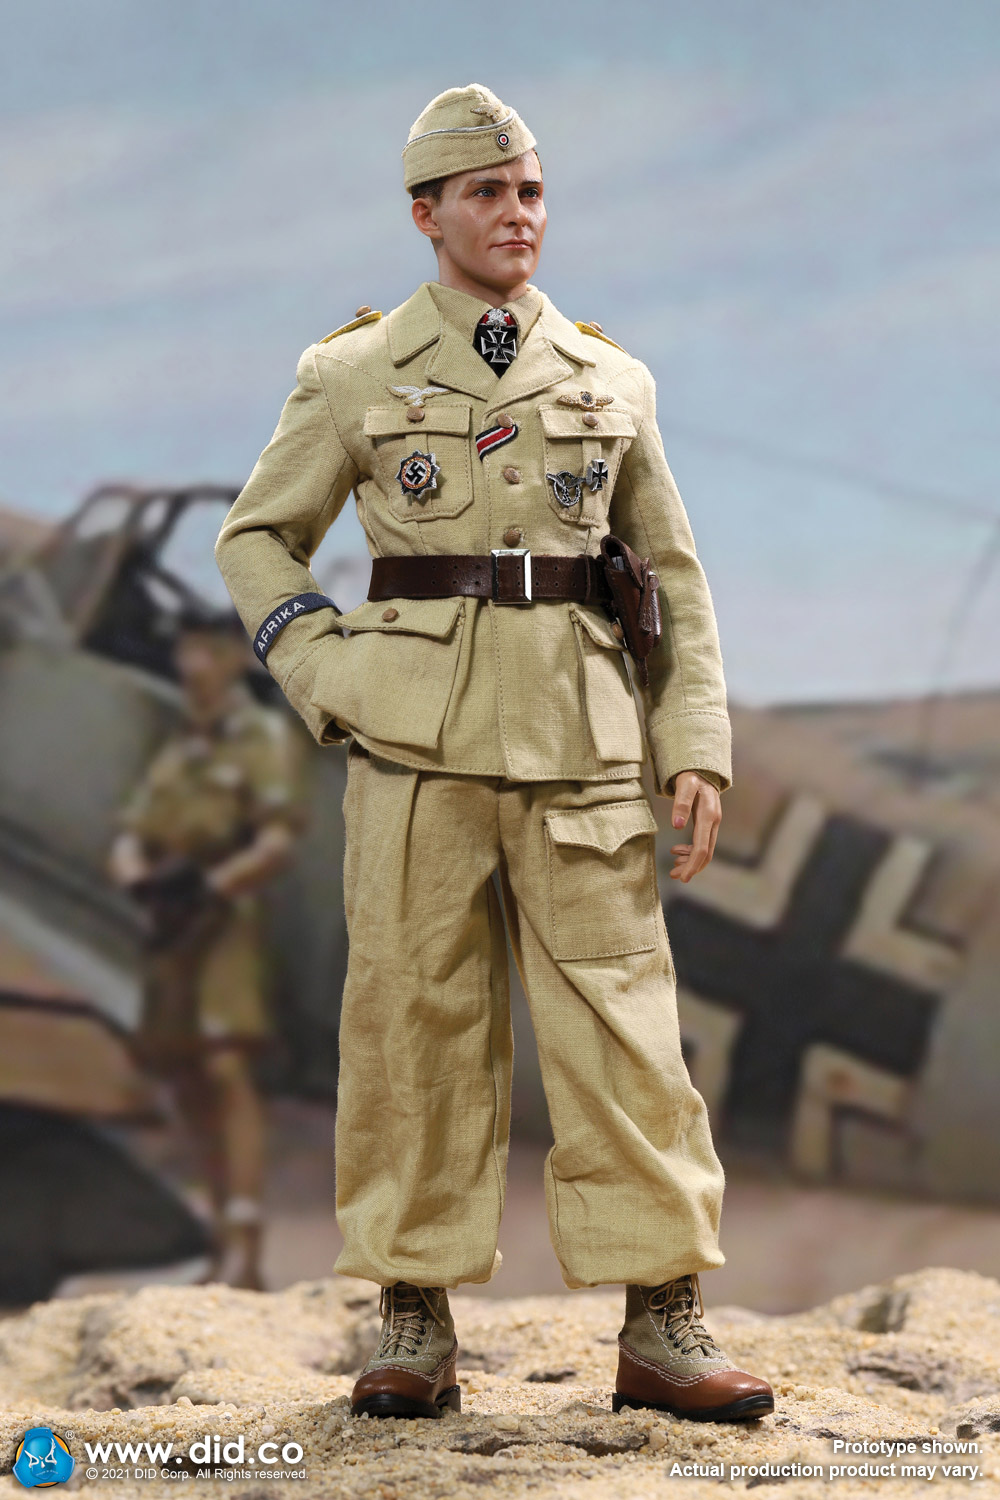 did - NEW PRODUCT: D80154 WWII German Luftwaffe Flying Ace “Star Of Africa” – Hans-Joachim Marseille & E60060  Diorama Of “Star Of Africa” 14321